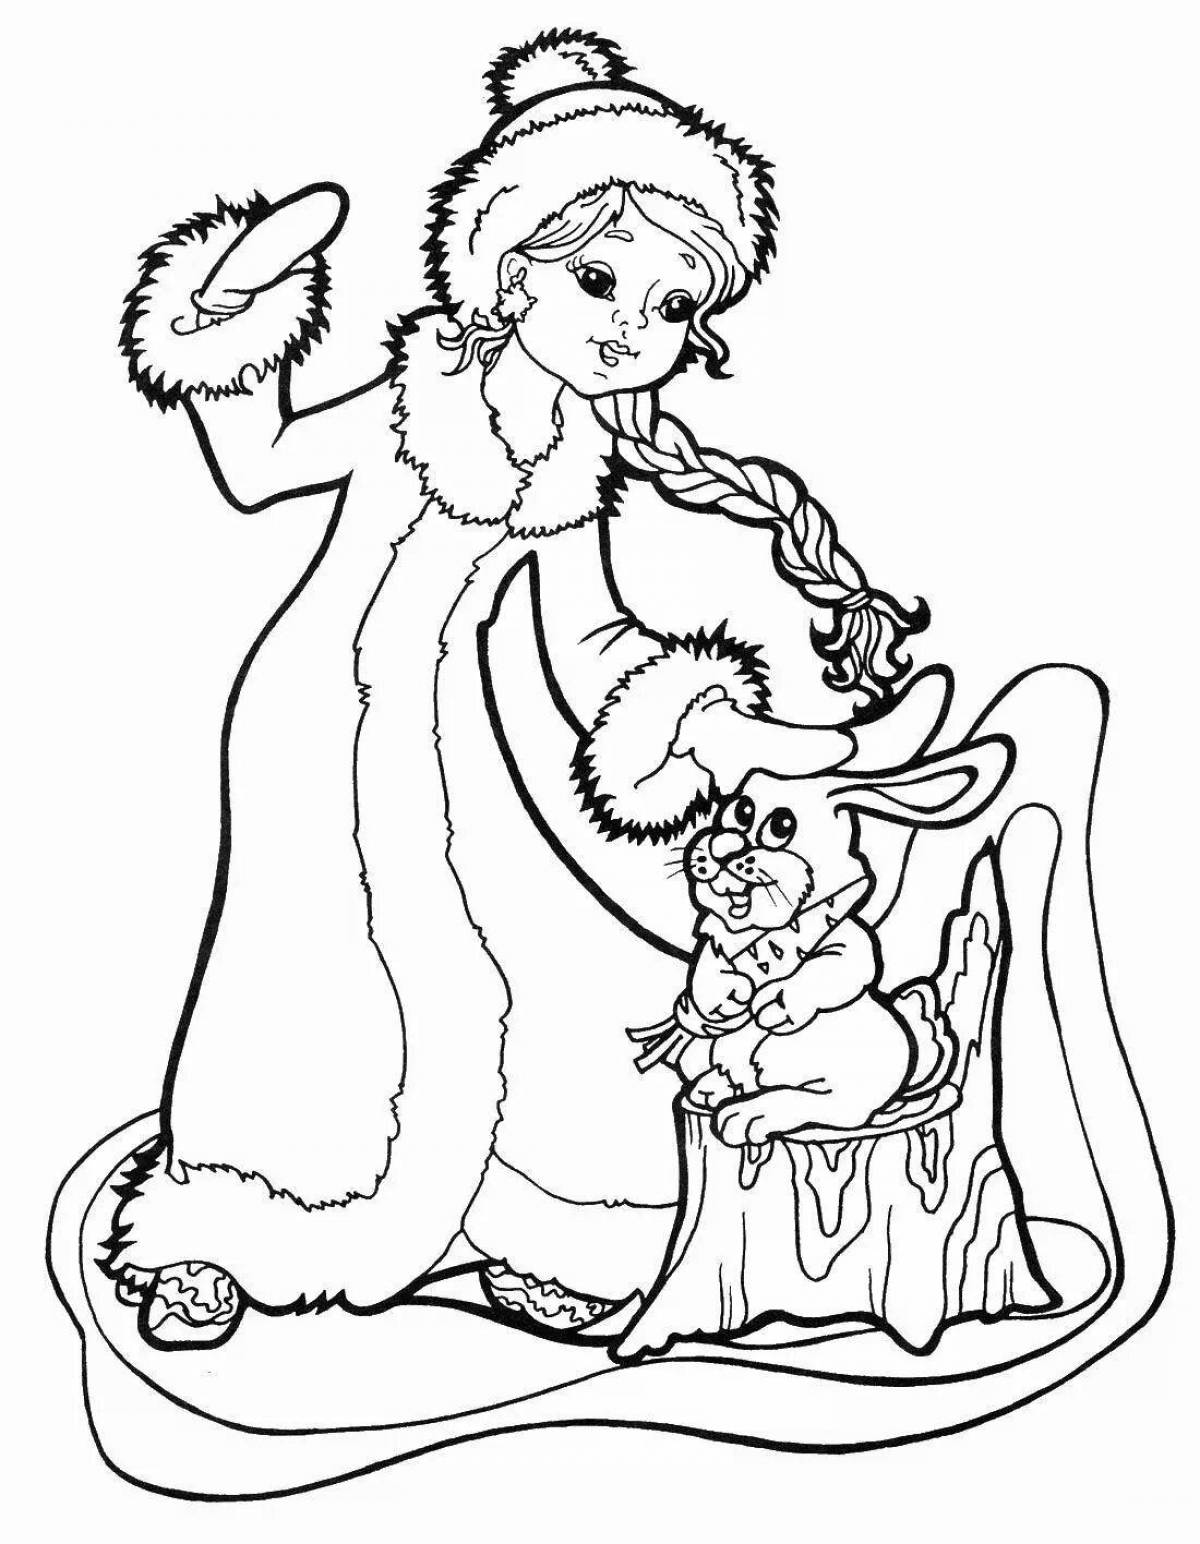 Glorious coloring drawing snow maiden